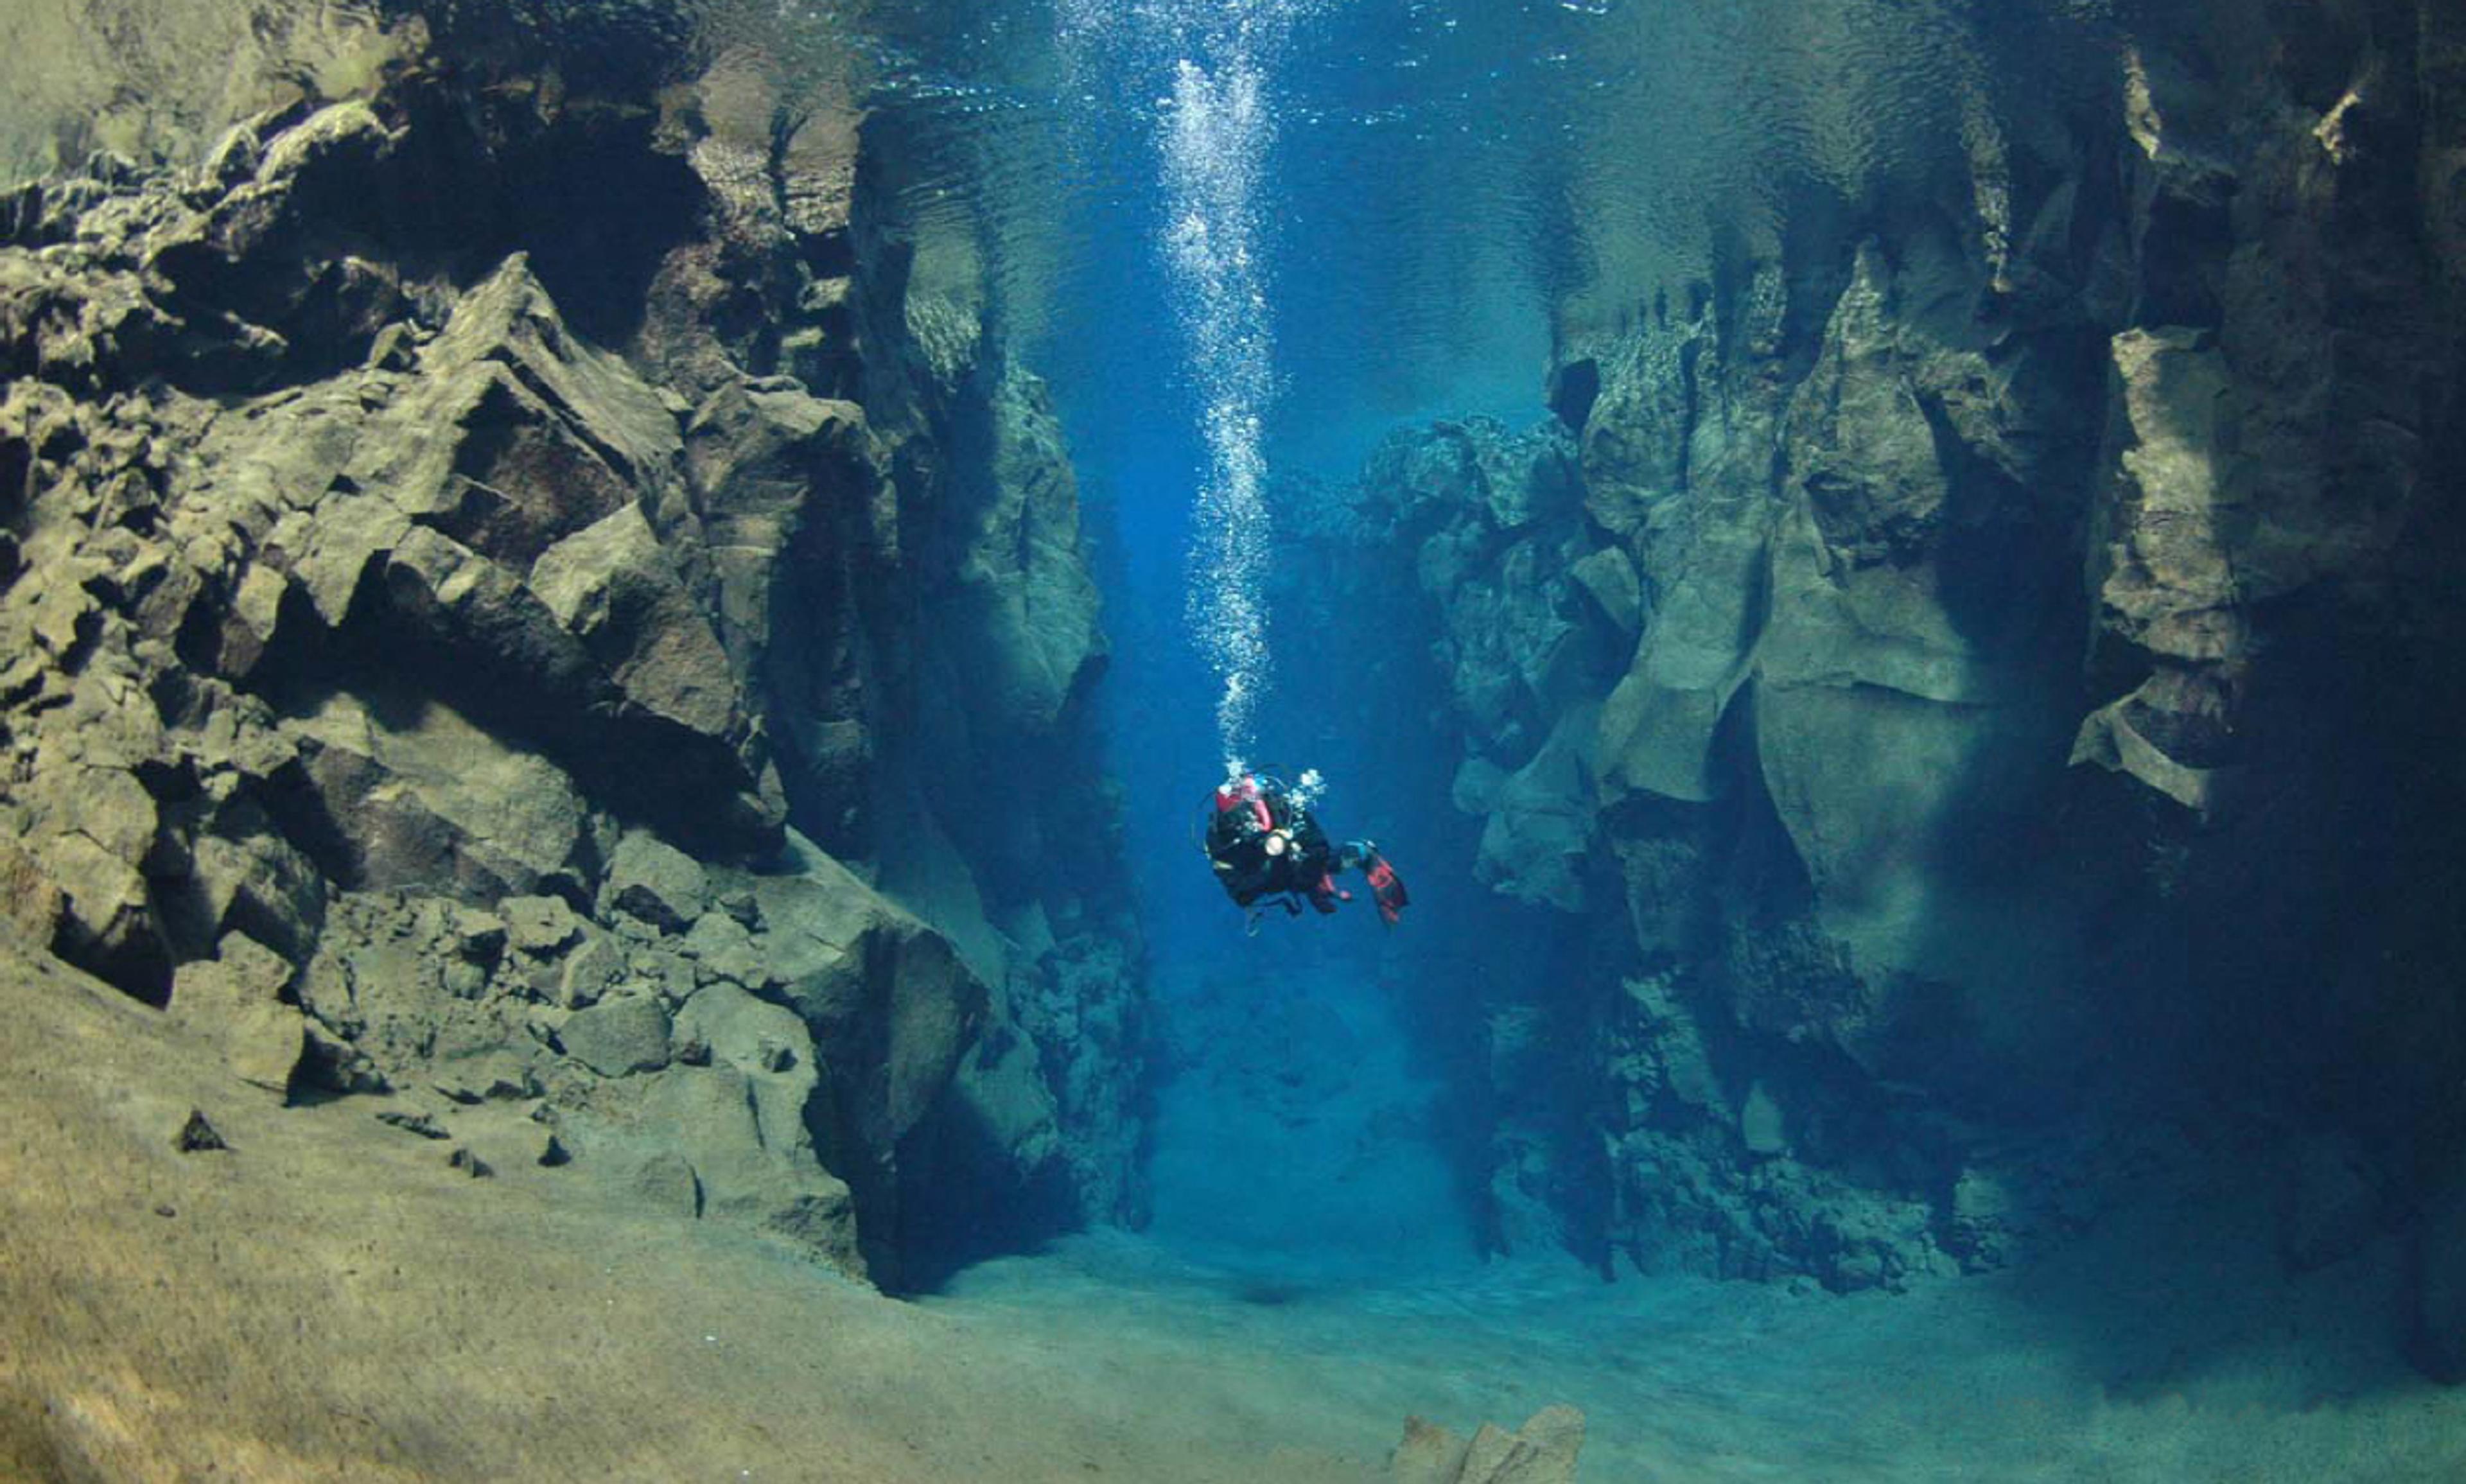 A scuba diver in the majestic  Silfra fissure in Thingvellir National Park